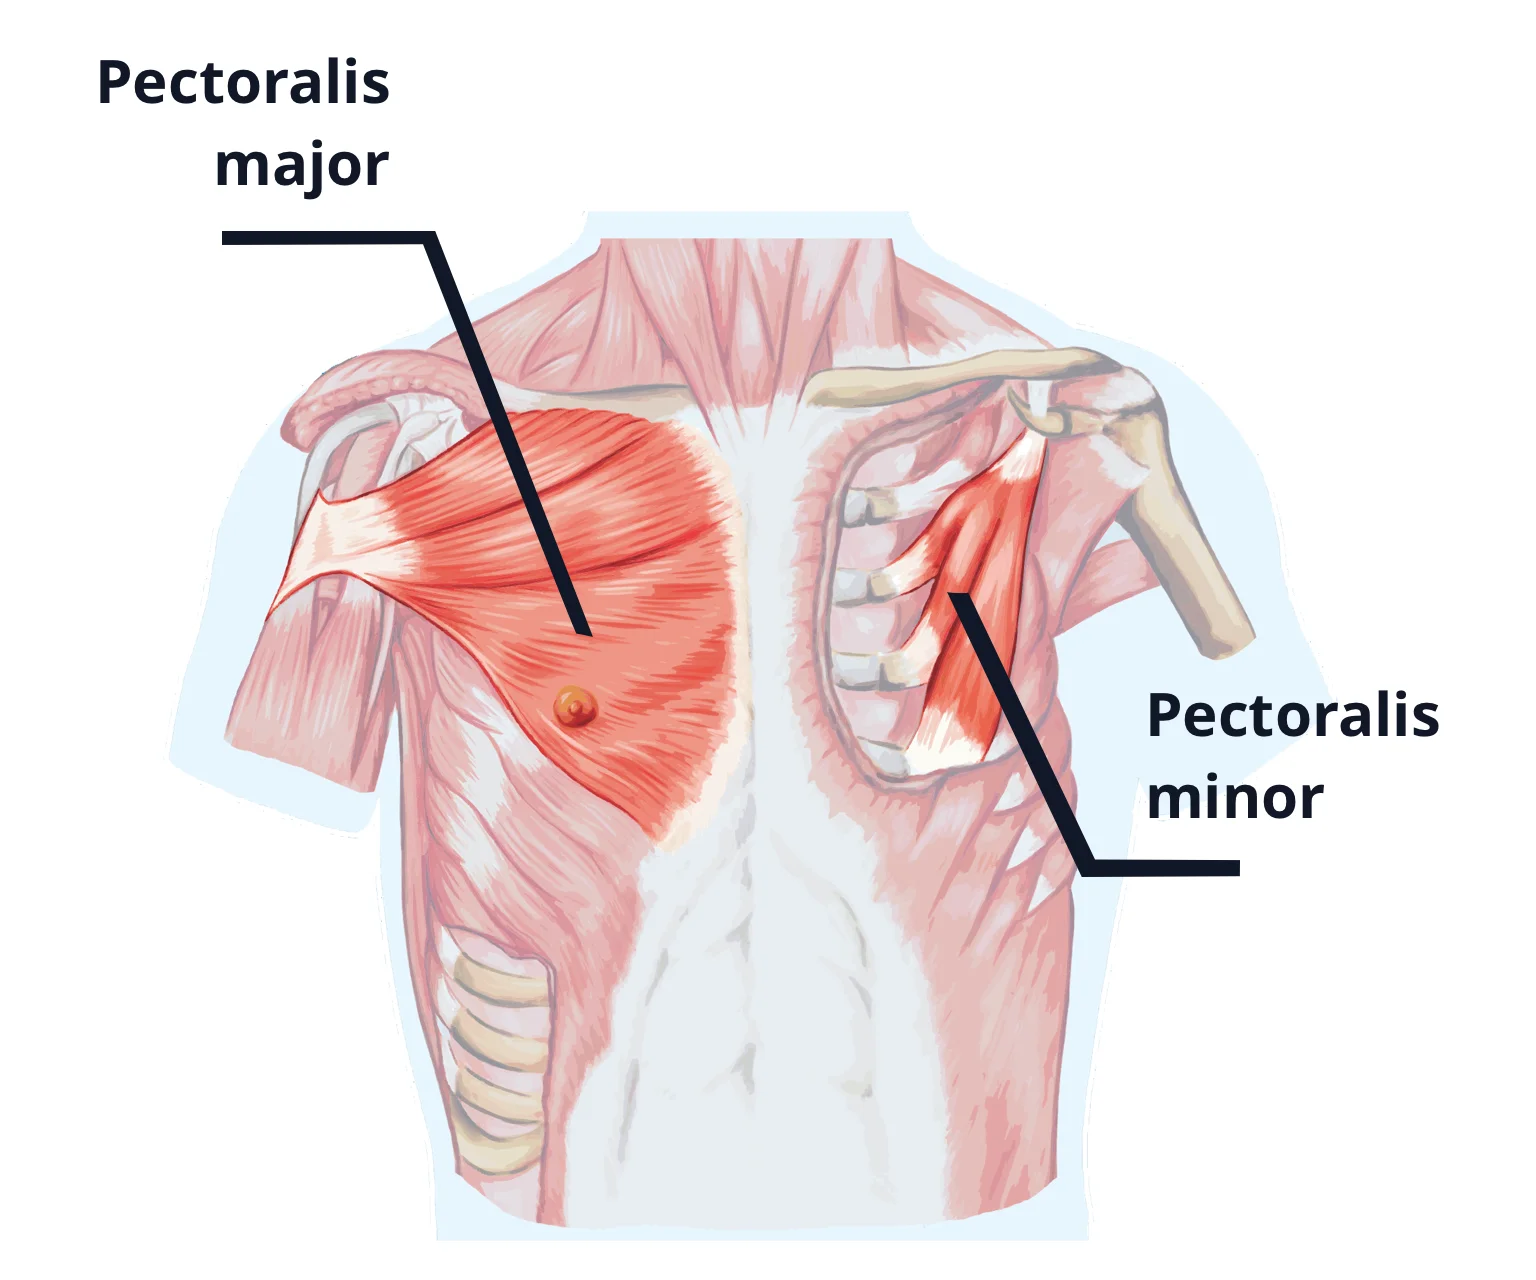 diagram - Showing the anatomy of the chest area. The pectoralis major and pectoralis minor are labelled.